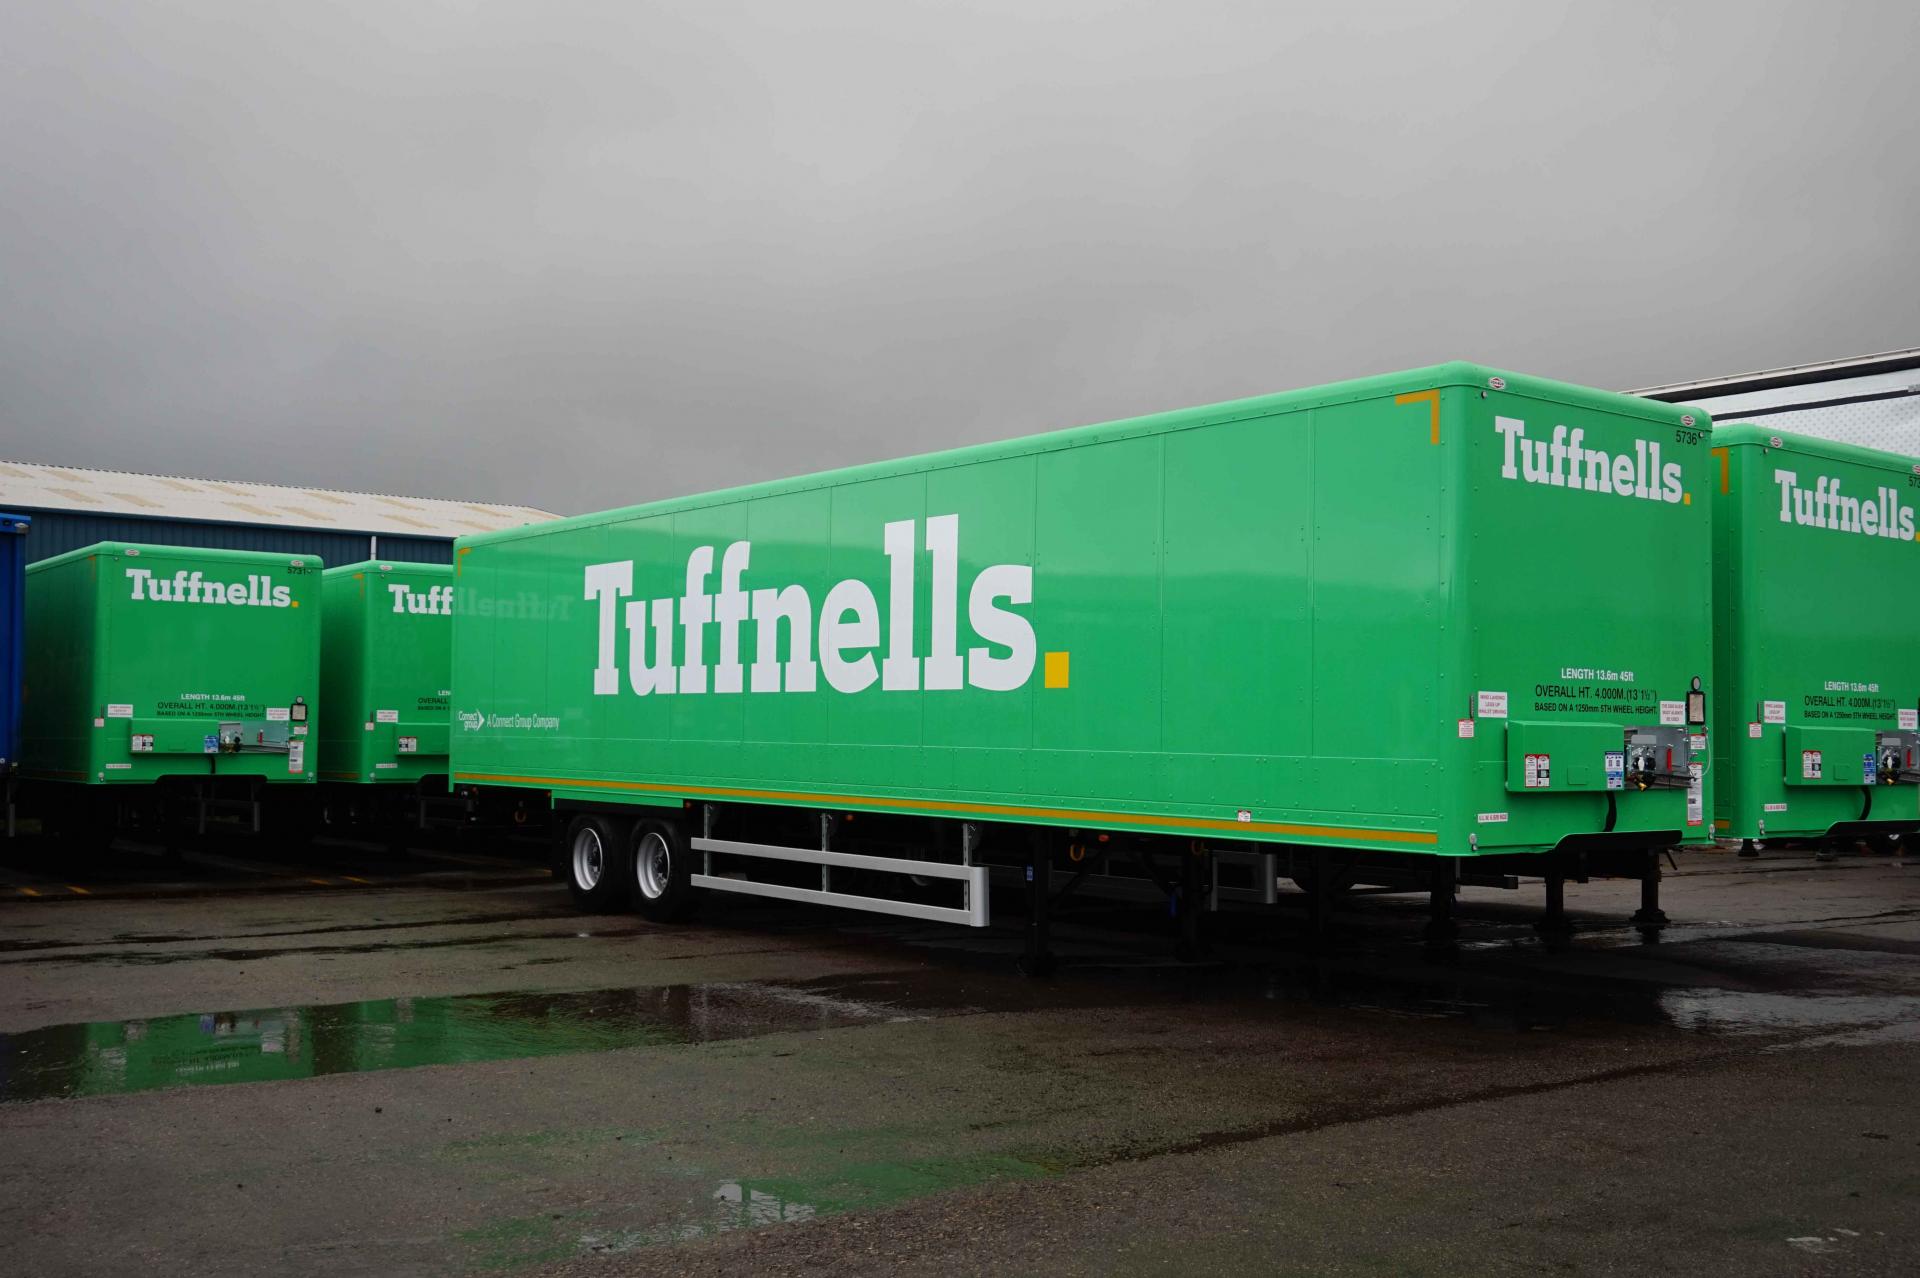 Tuffnells falls into administration after failing to secure funds 